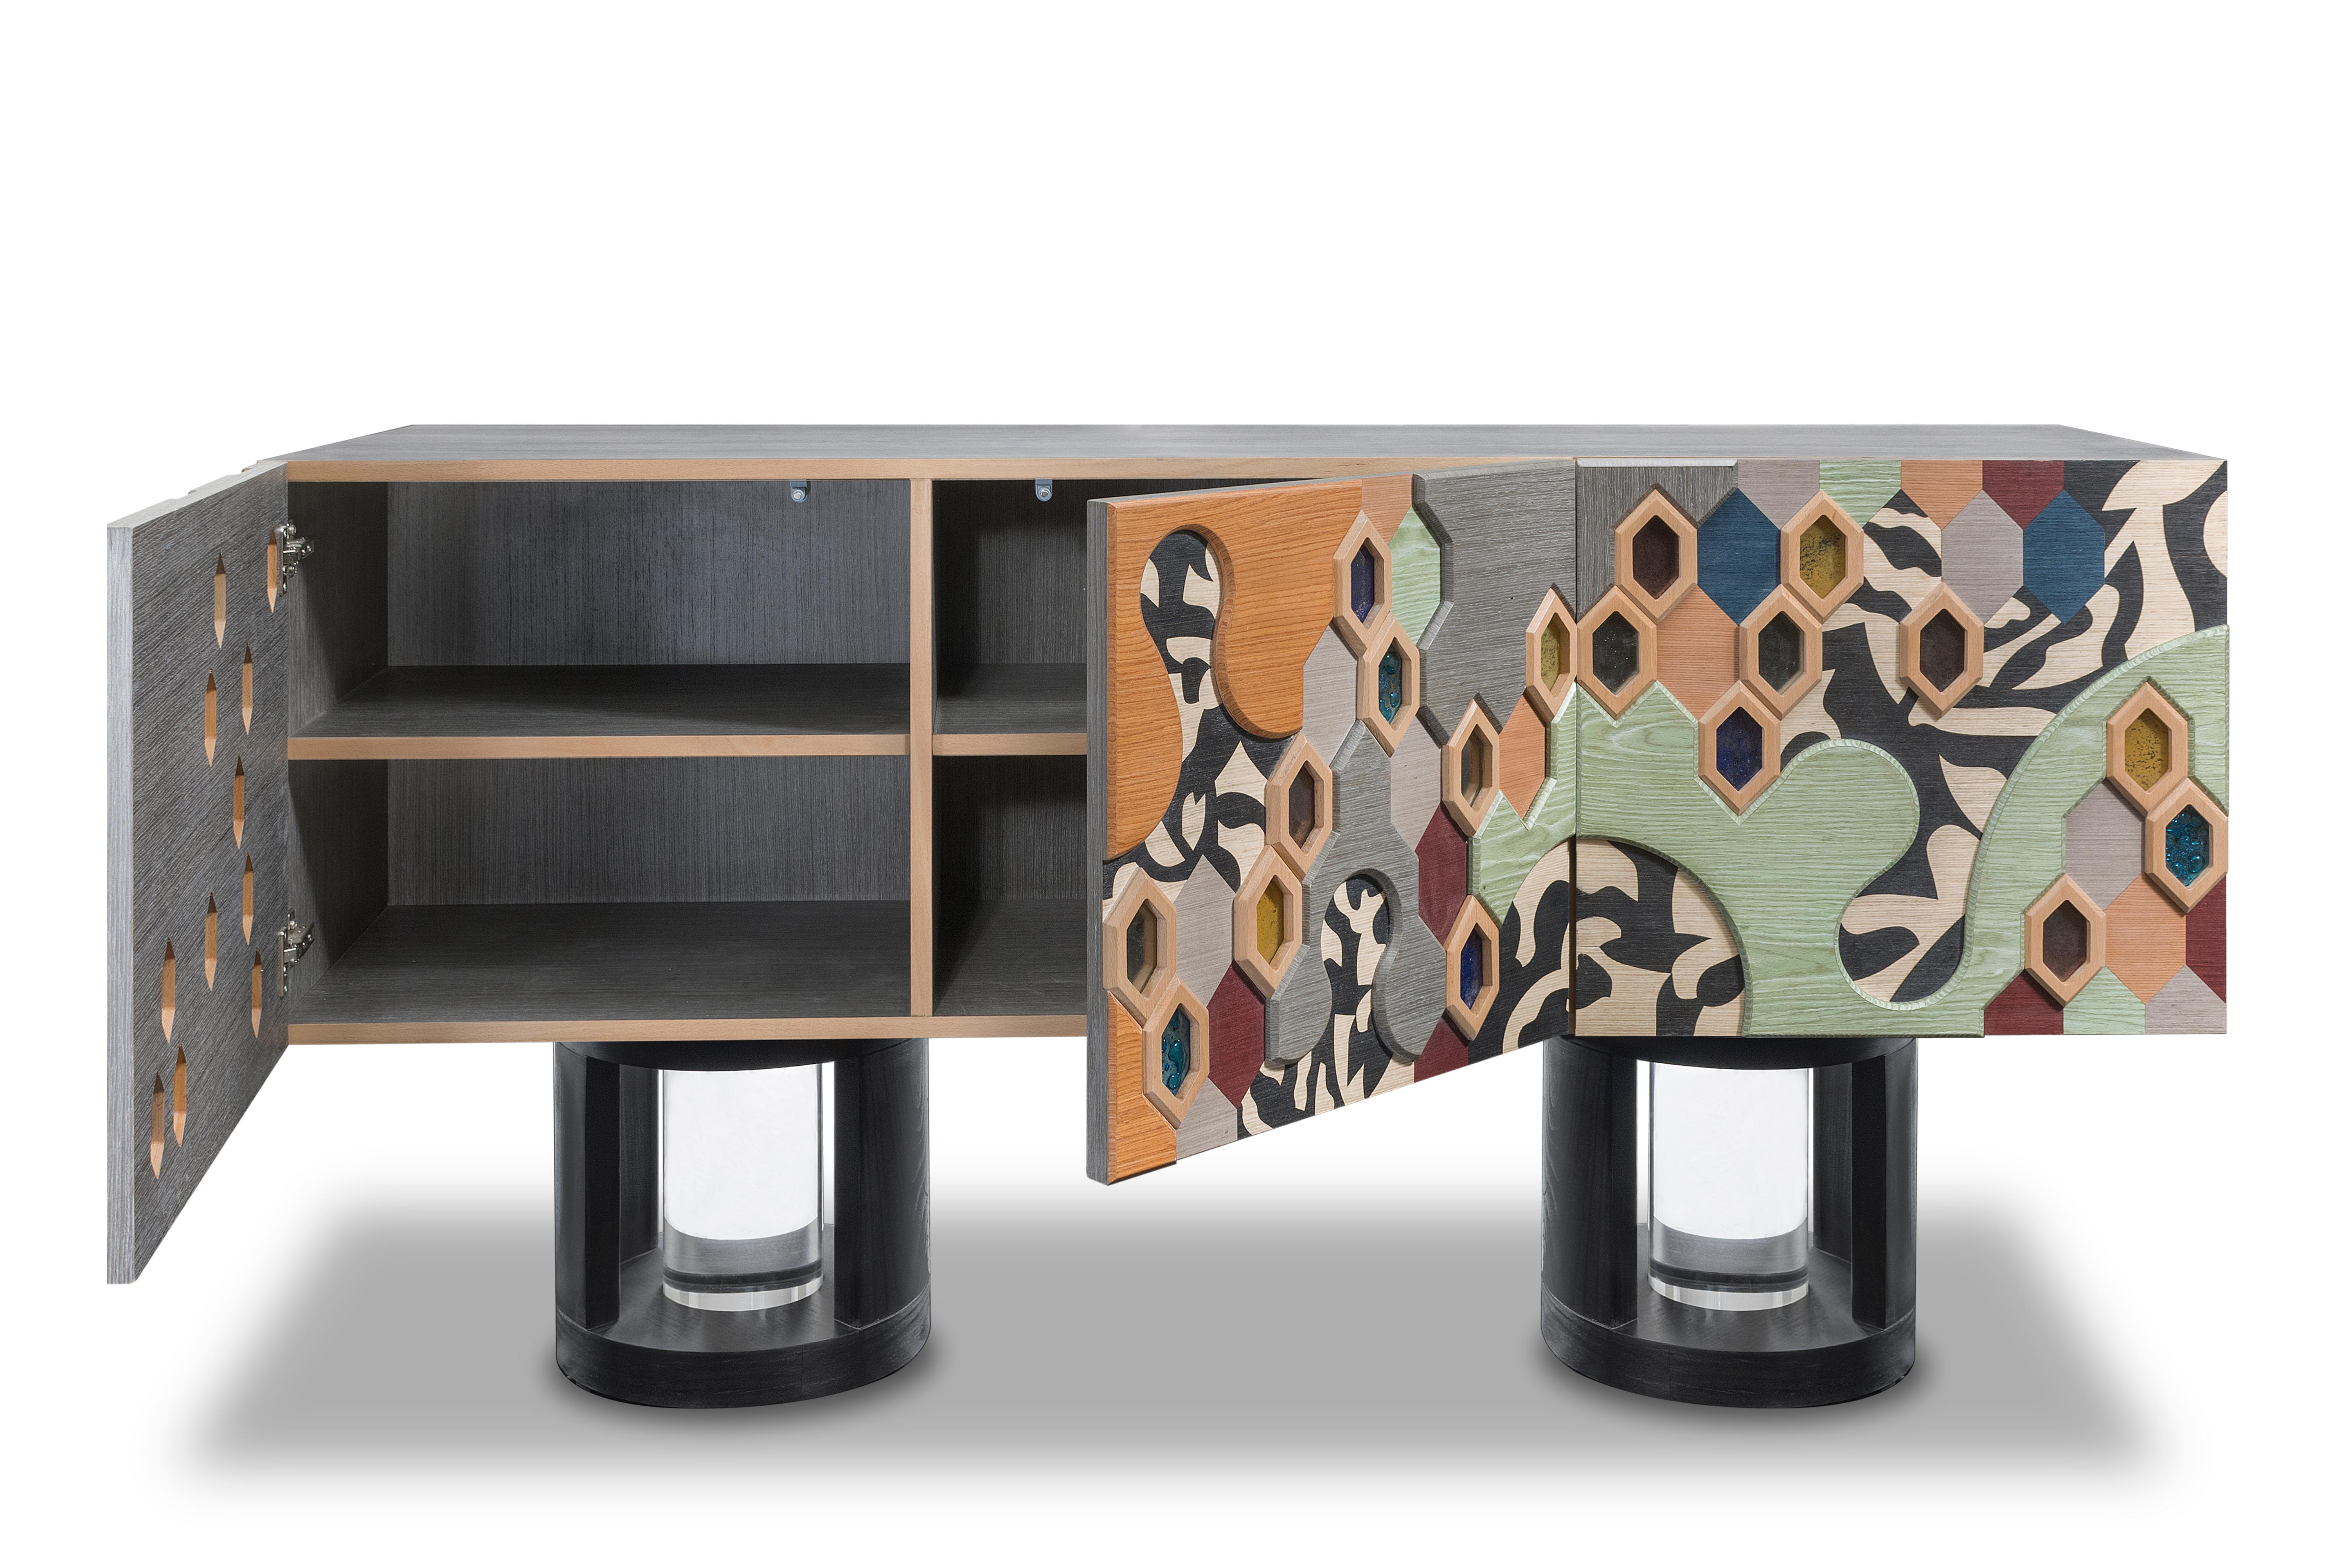 The Honey Comb Sideboard is a stunning and contemporary piece designed to be both functional and visually captivating. The black and white figures symbolize the straight forward connection or interaction between two happy people evolving in the